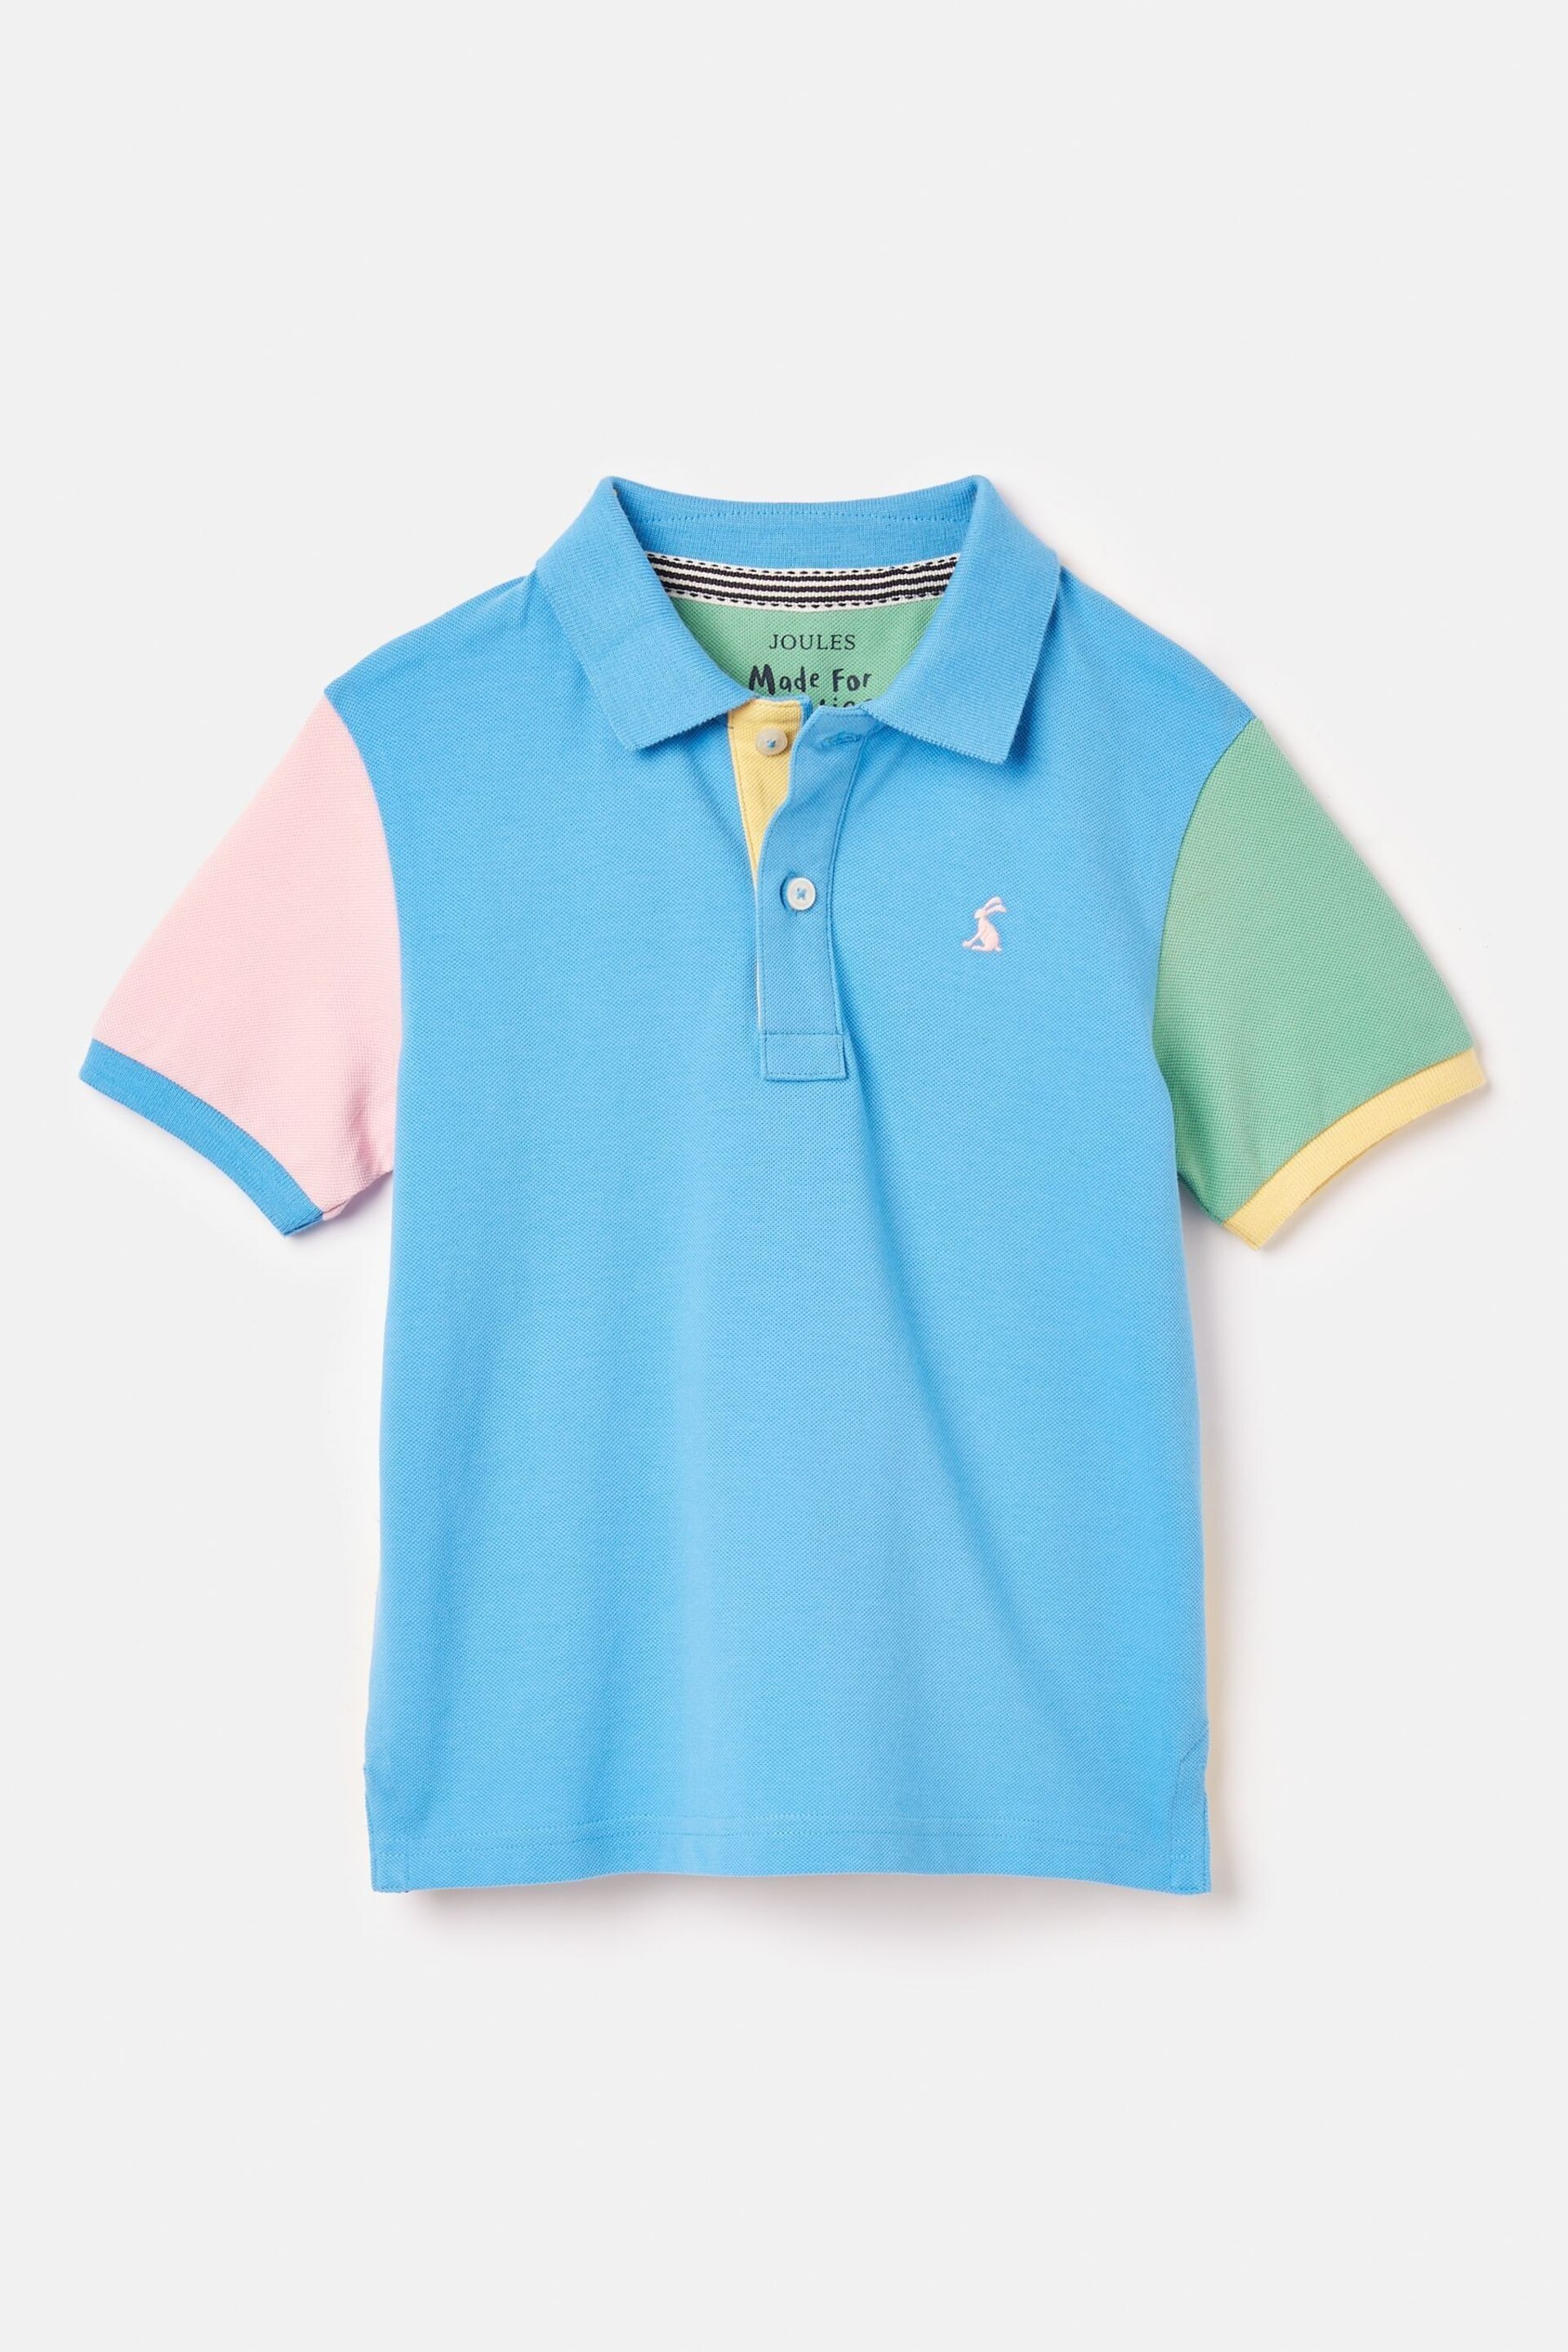 Joules Woody Multi Pique Cotton Polo Shirt - Image 1 of 5